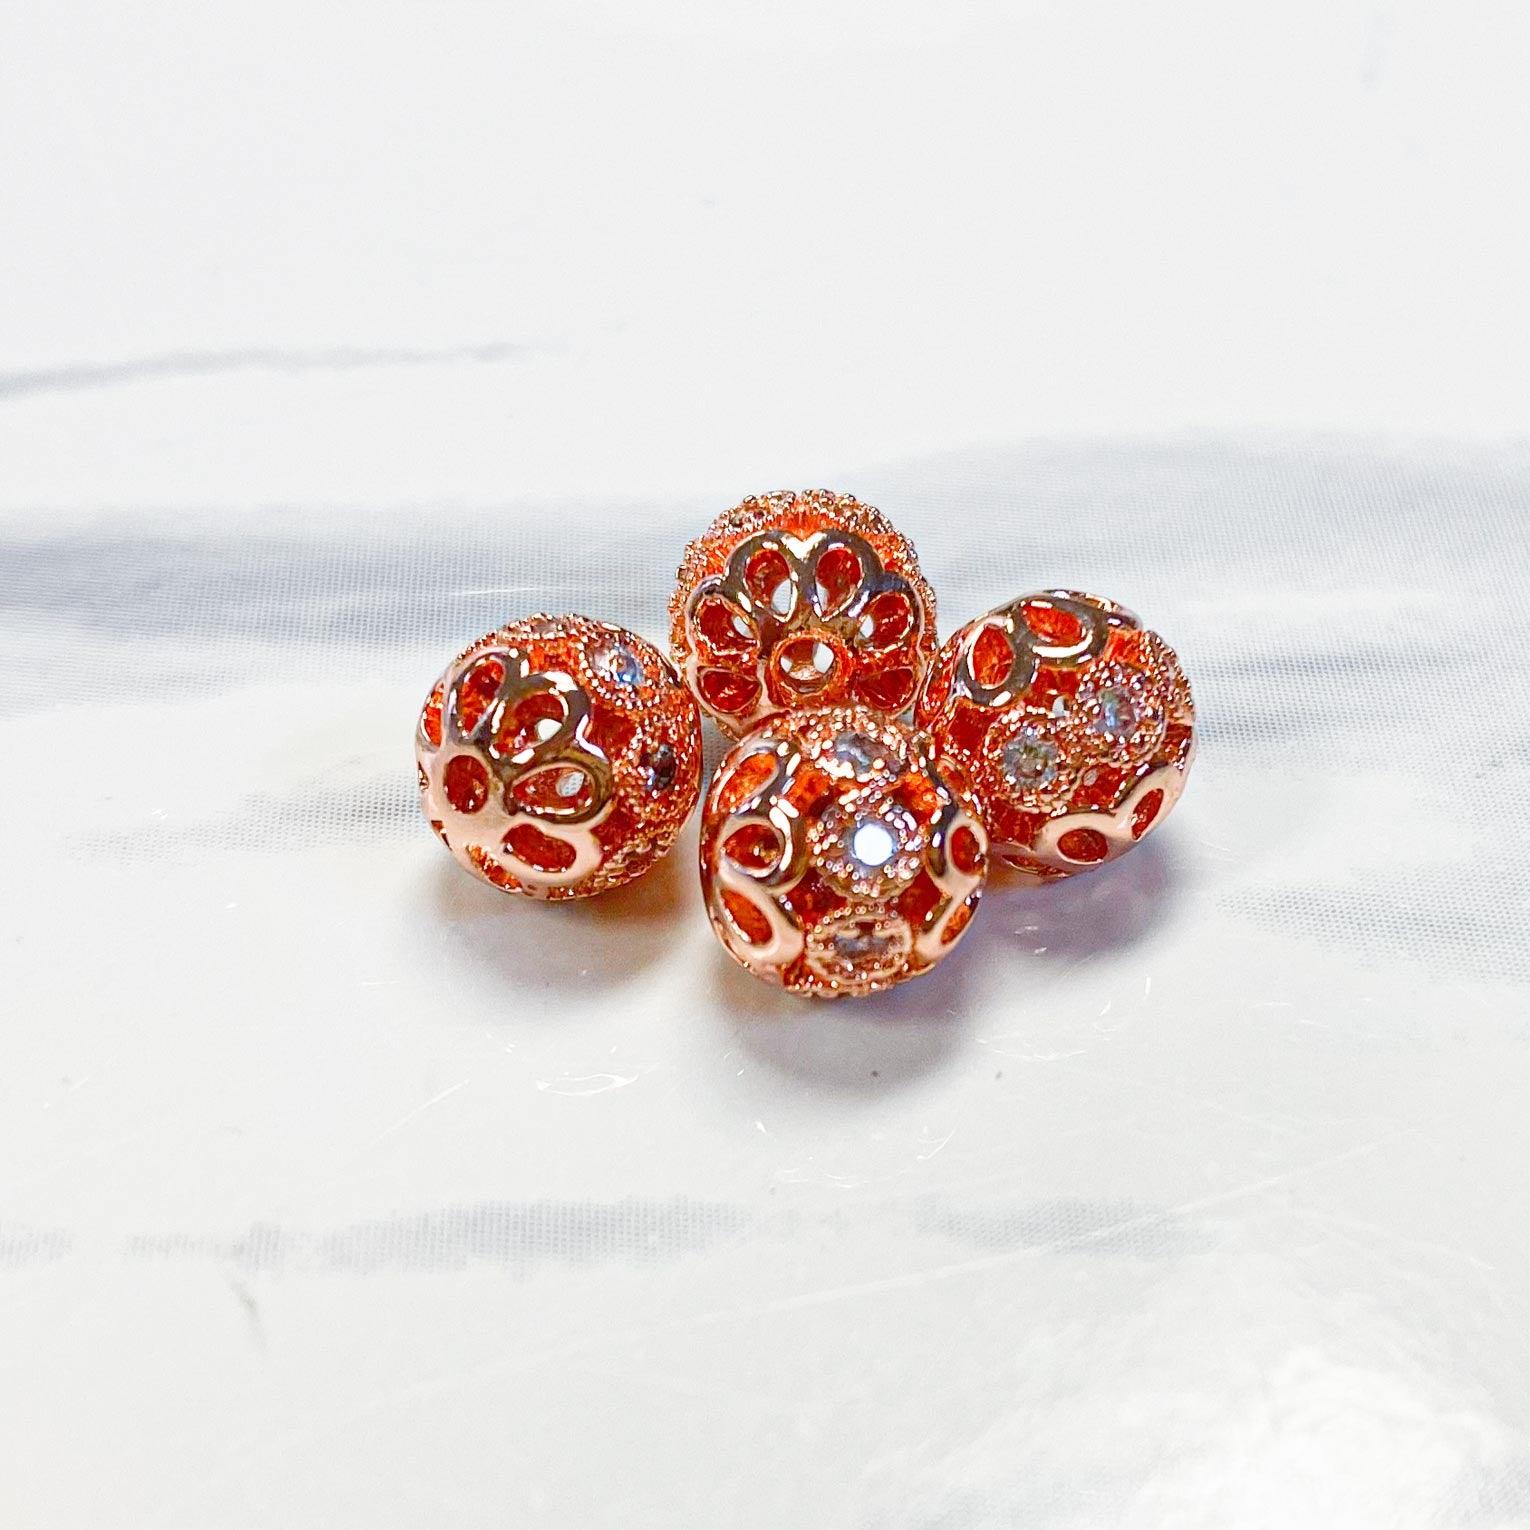 8mm Micro Pave CZ Beads (Sold by the Piece)